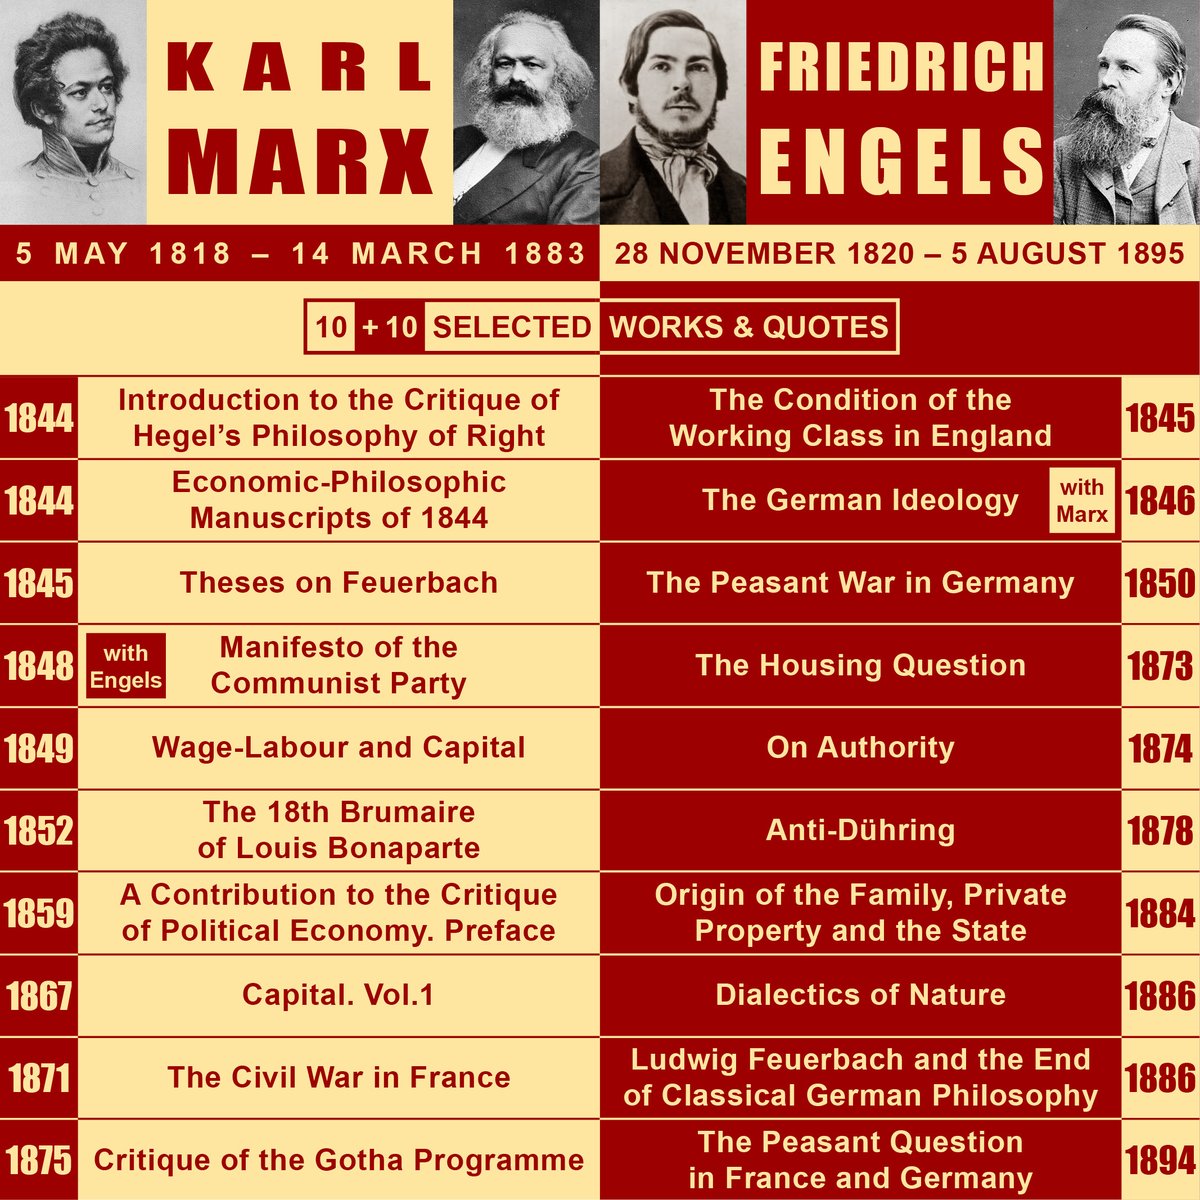 On the 5th of May, 1818, in Trier, Germany, the communist philosopher, economist, and revolutionary, Karl Marx was born 🎂

Here is a thread of 10 works + 10 quotes from Marx, and 10 works + 10 quotes from his lifelong collaborator and friend, Friedrich Engels 📚📕 🚩#OTD #Marx